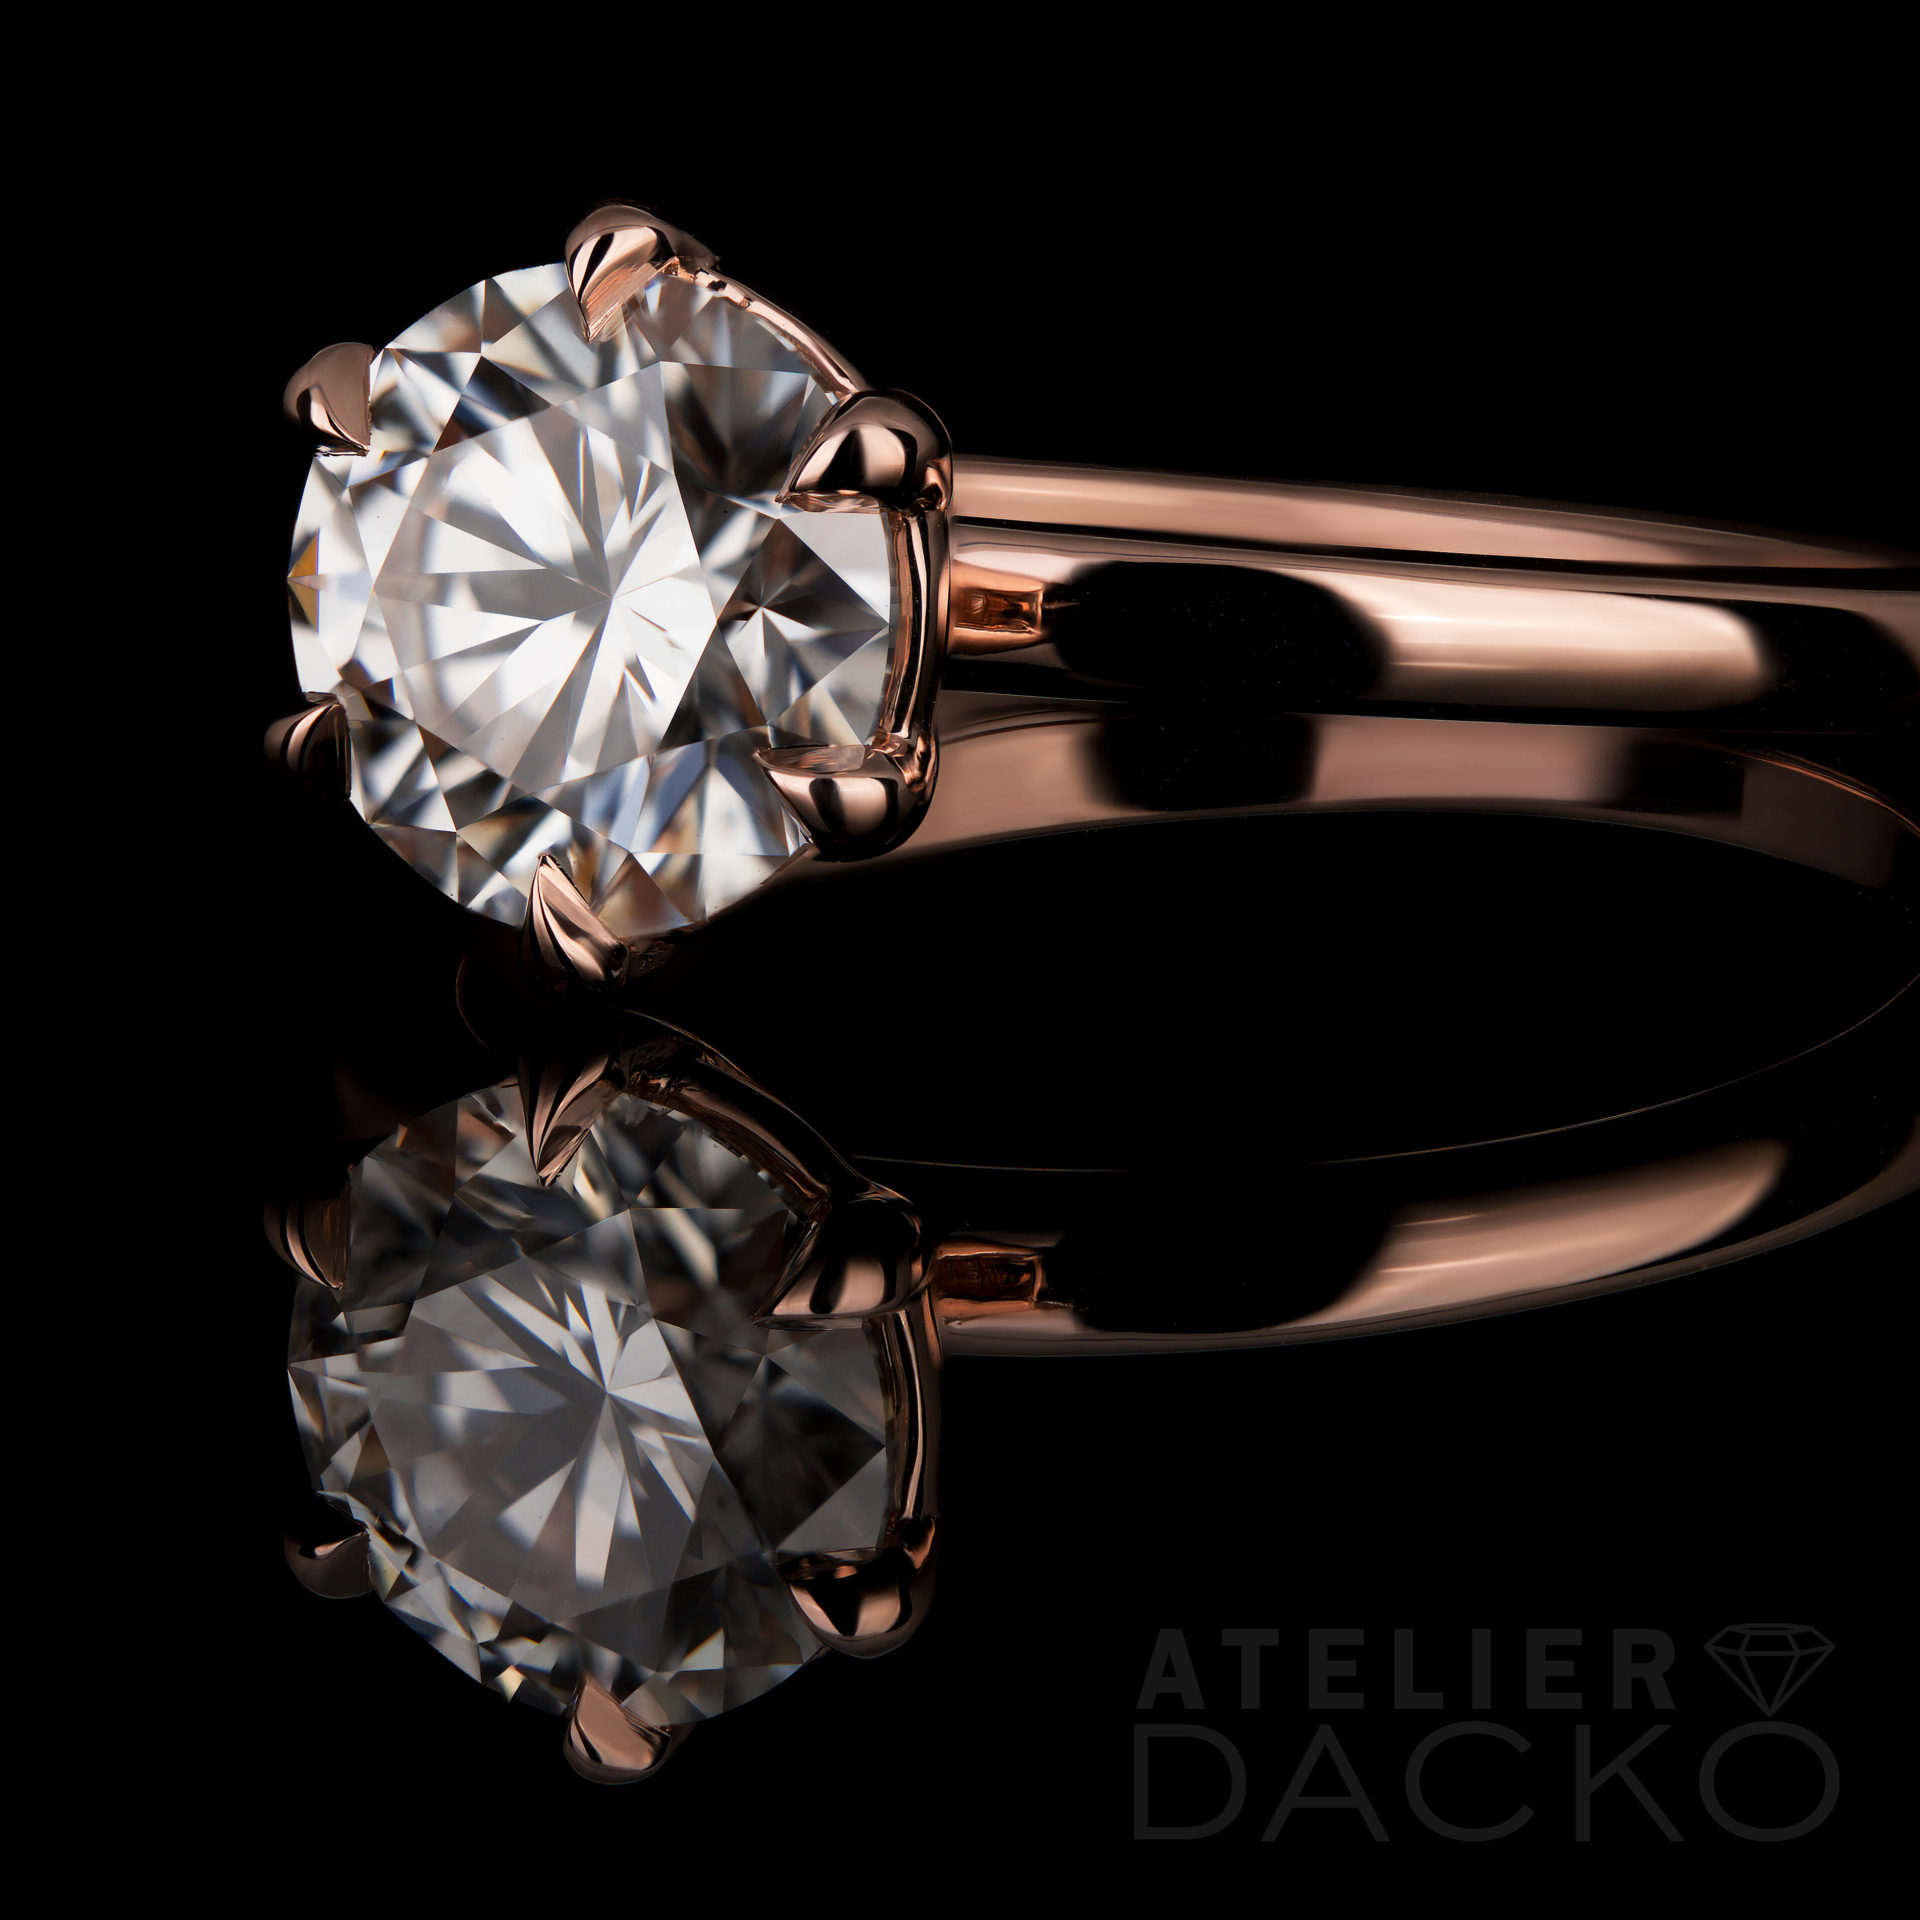 AD014 - 0.96 CT Round Diamond Solitaire Engagement Ring in Rose Gold - 4